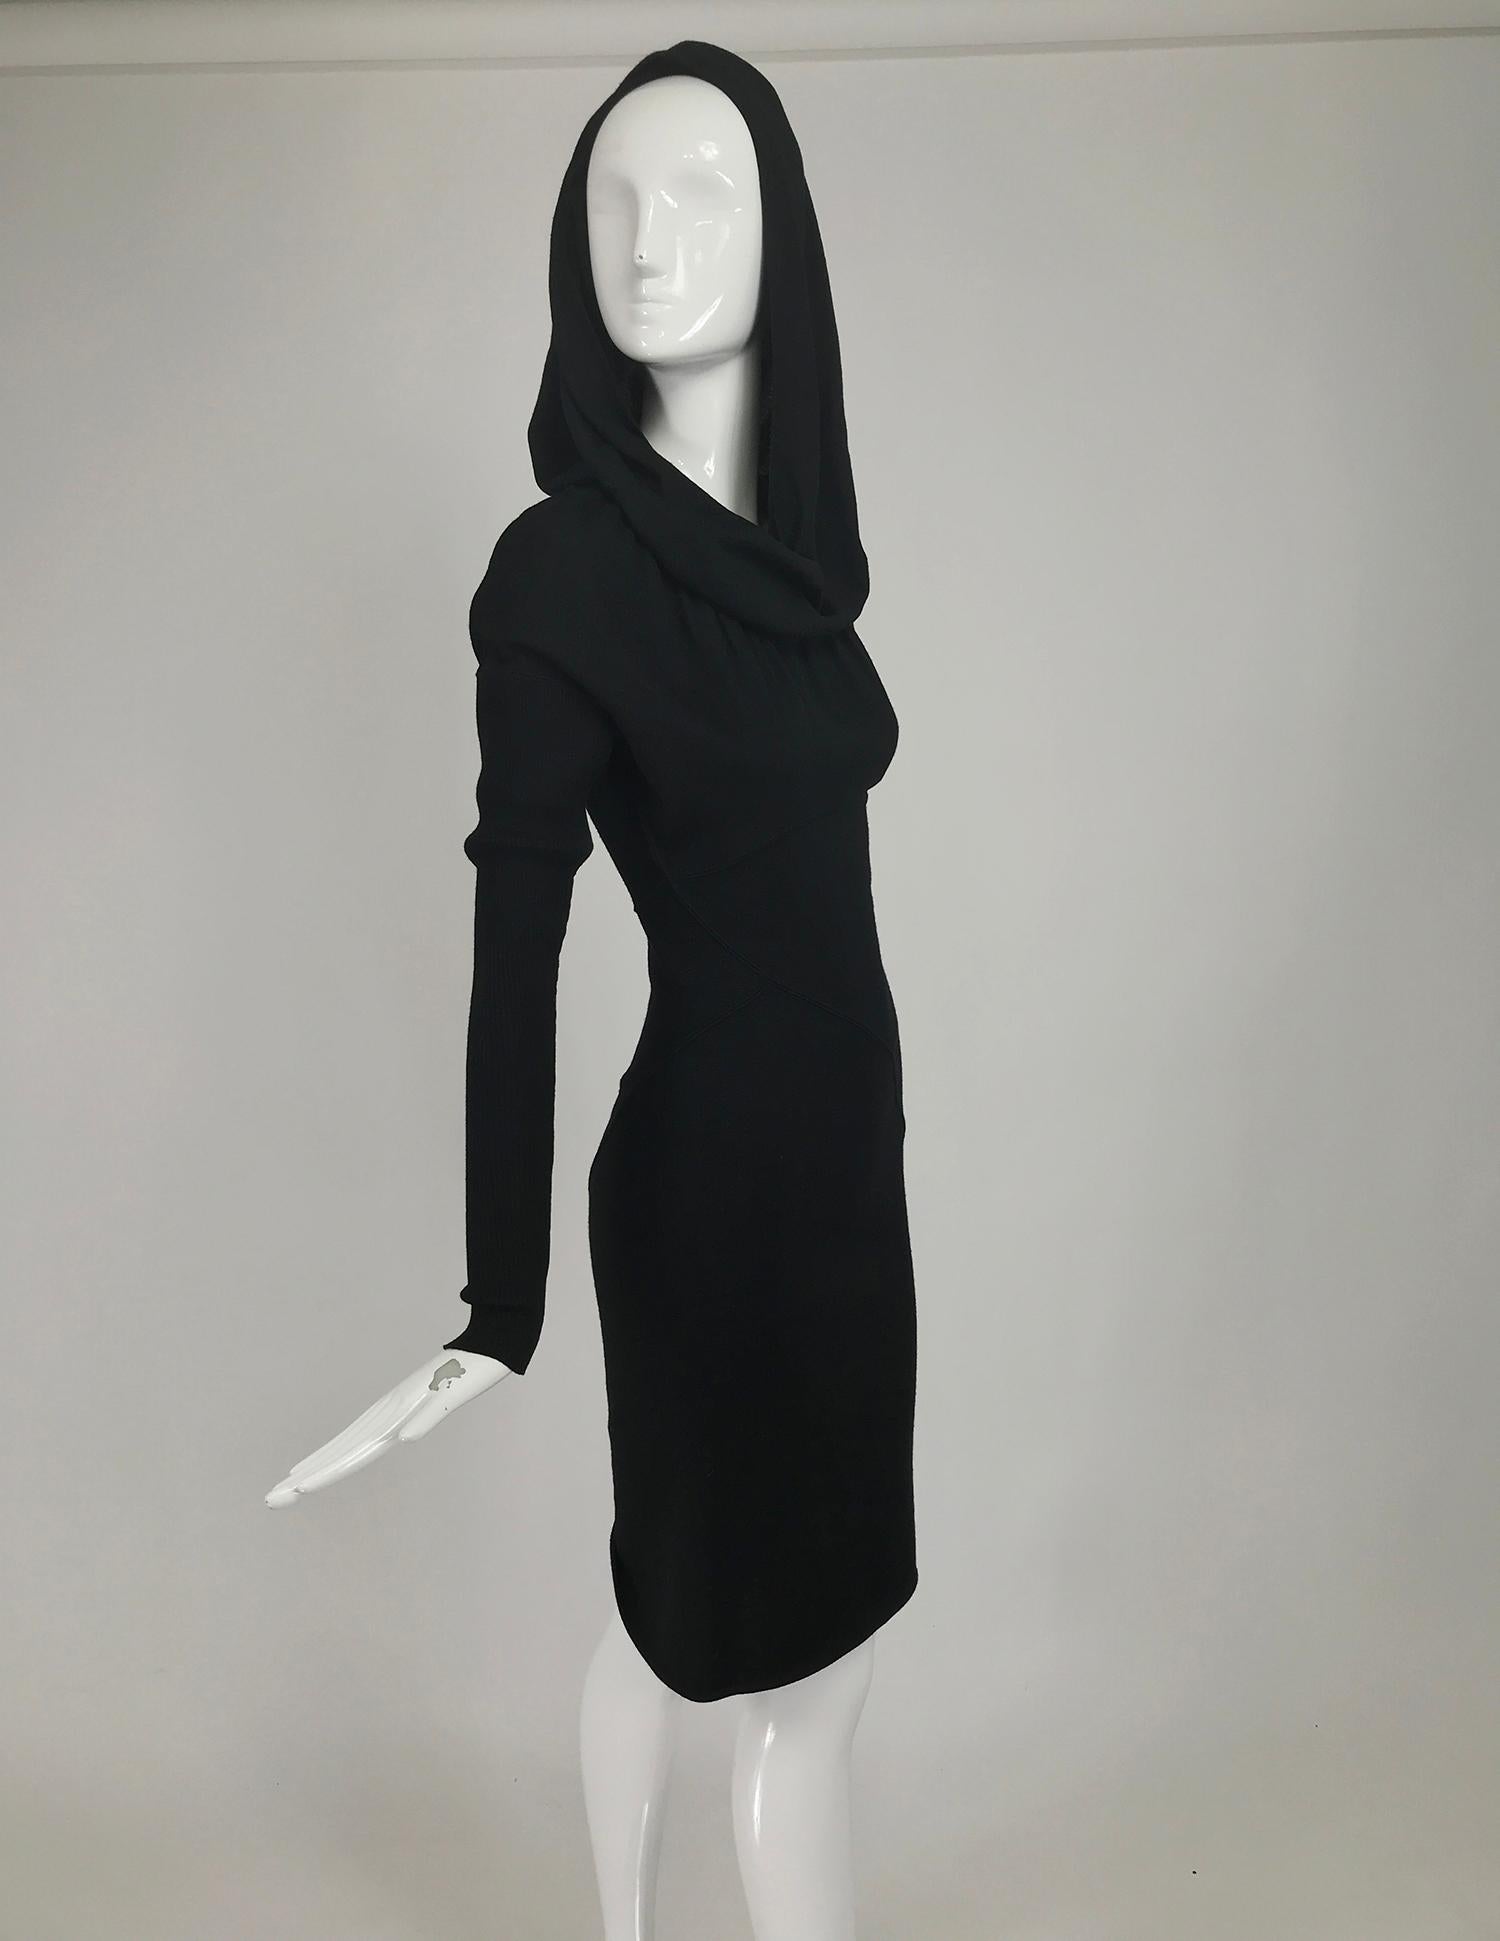 Azzedine Alaïa 1980s black wool knit hooded body con mini dress. This amazing version of the iconic dress with hood has is done in black wool. The bodice is flat knit the extra long sleeves are ribbed knit, with dropped shoulder line. A flat curved